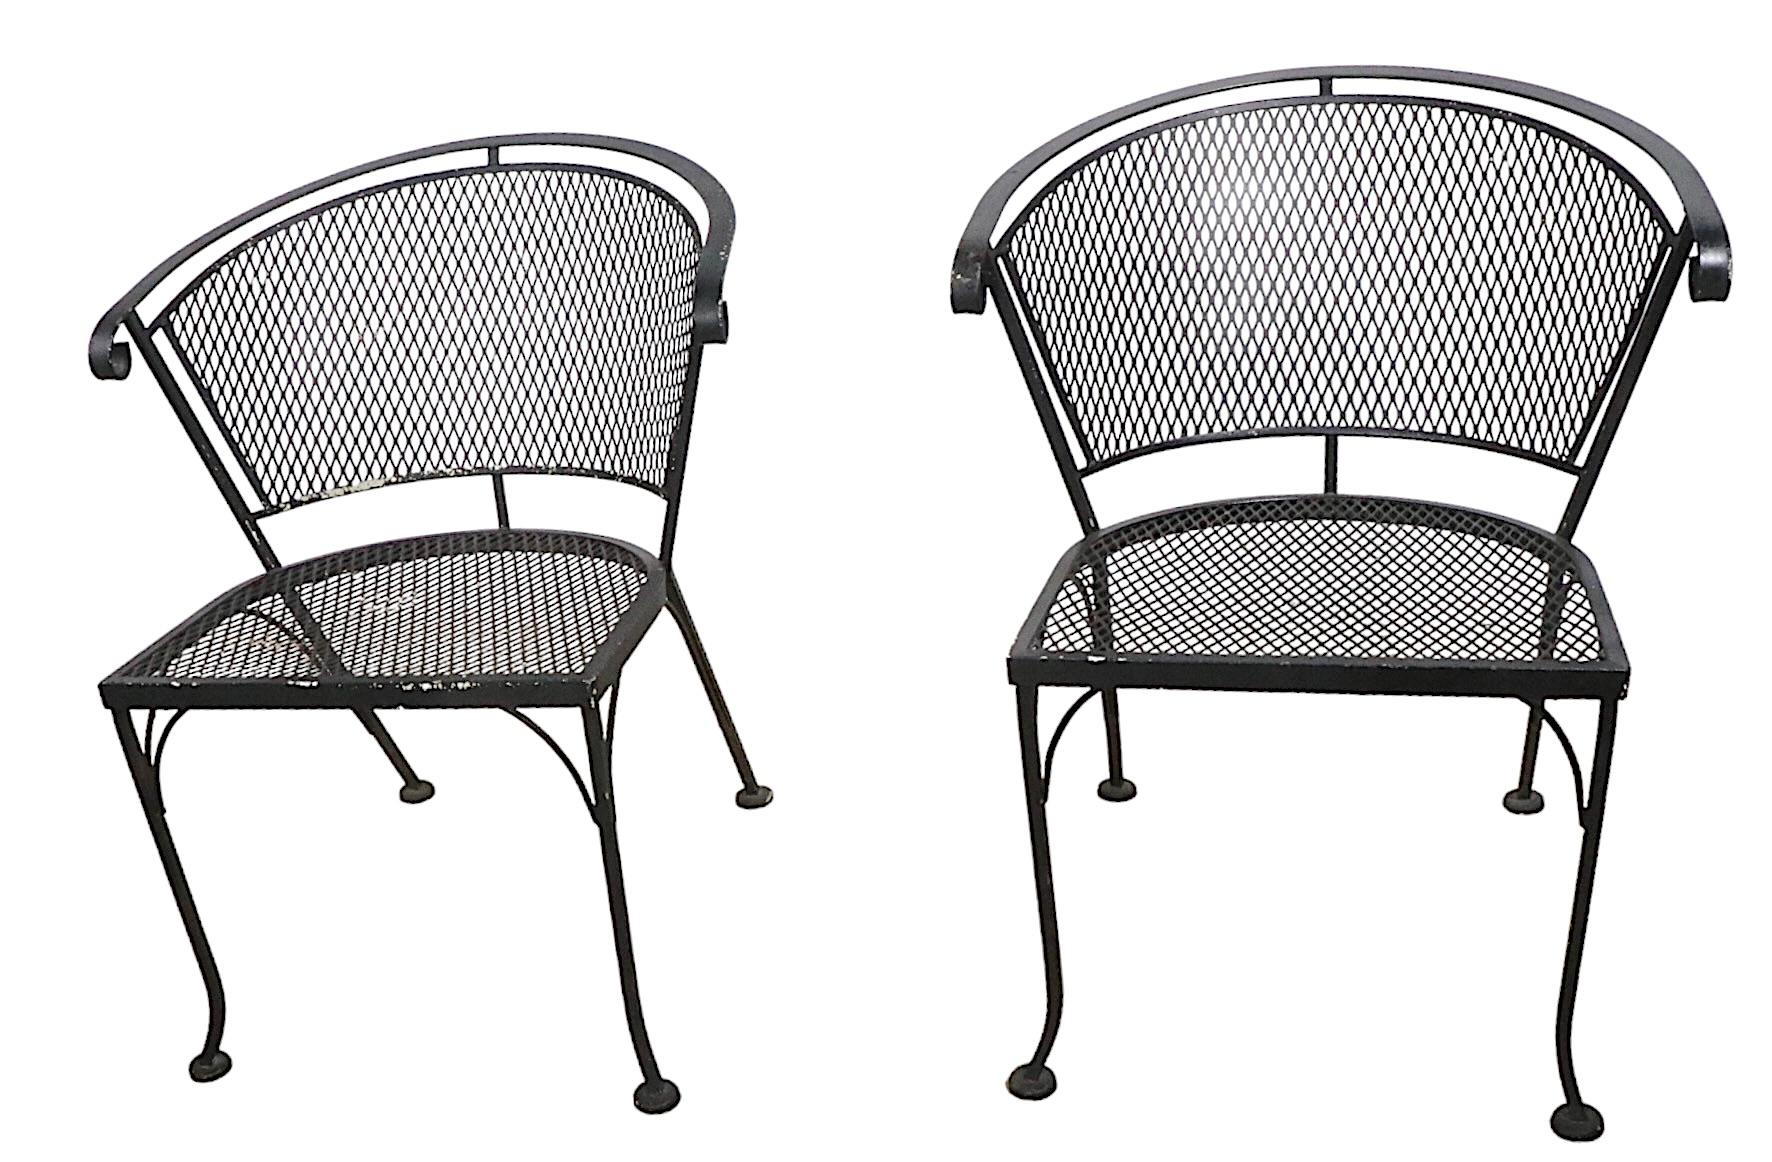 Pr Vintage  Woodard Garden Patio Poolside Chairs in Wrought Iron and Metal Mesh  4